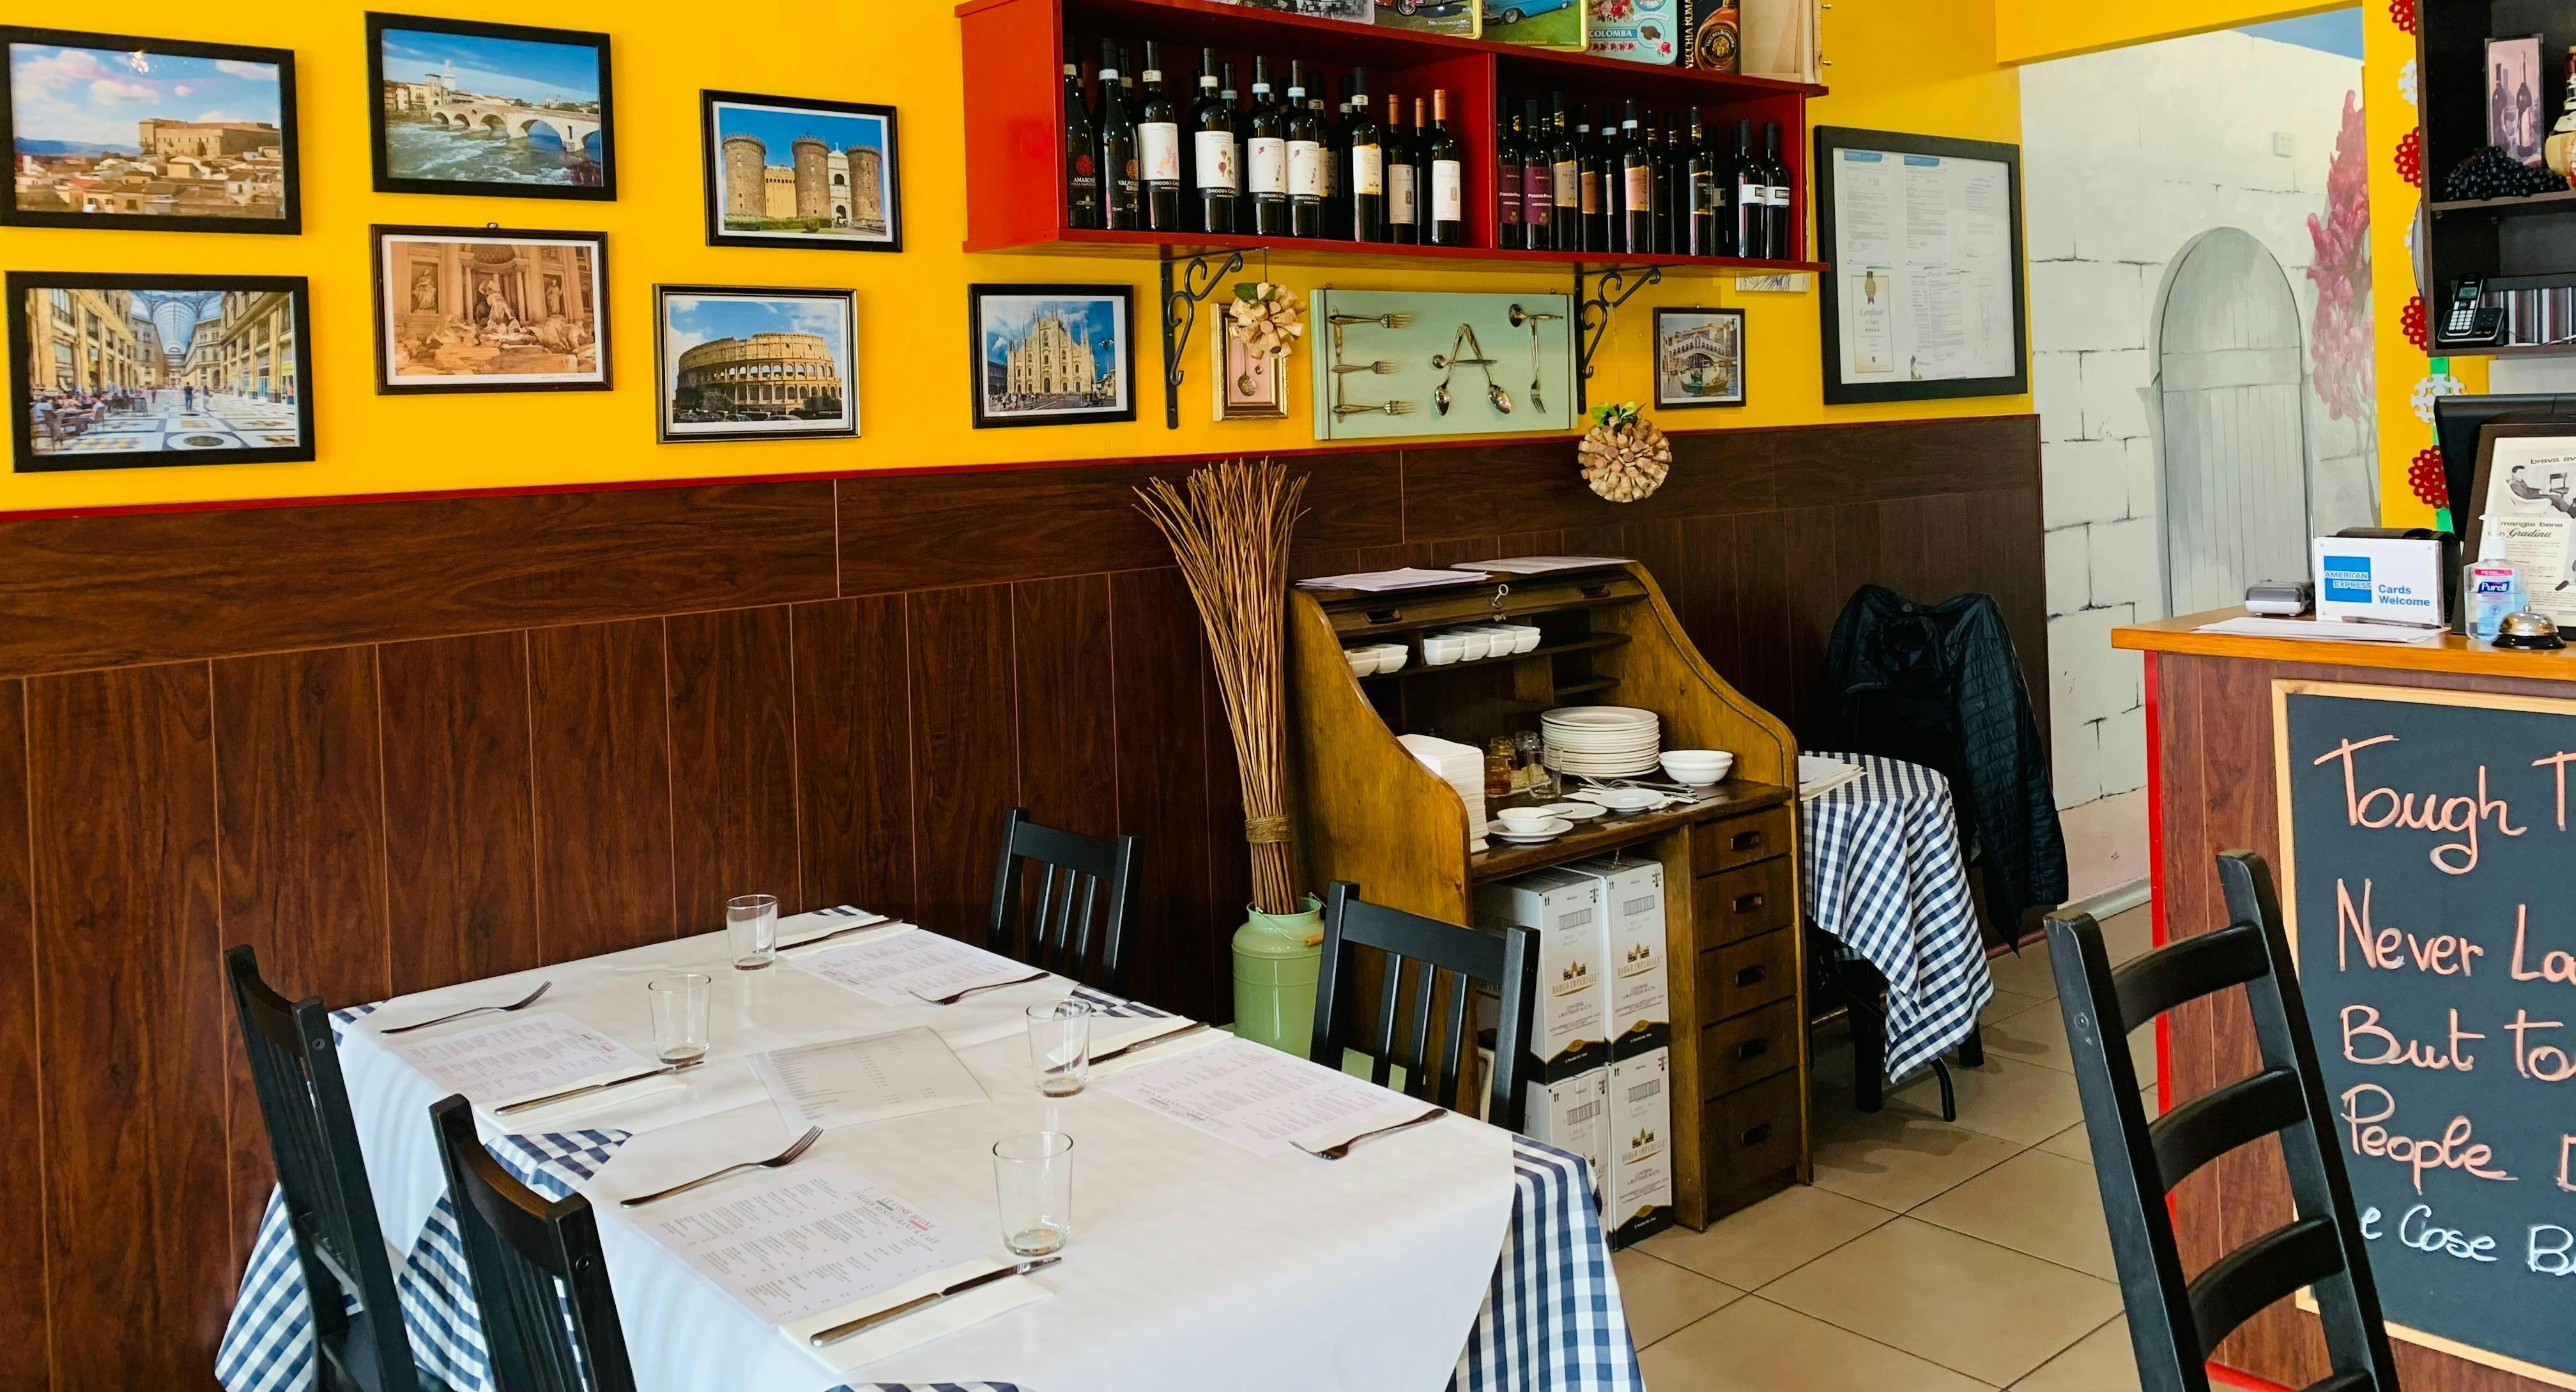 Photo of restaurant Le Cose Buone in Bentleigh East, Melbourne